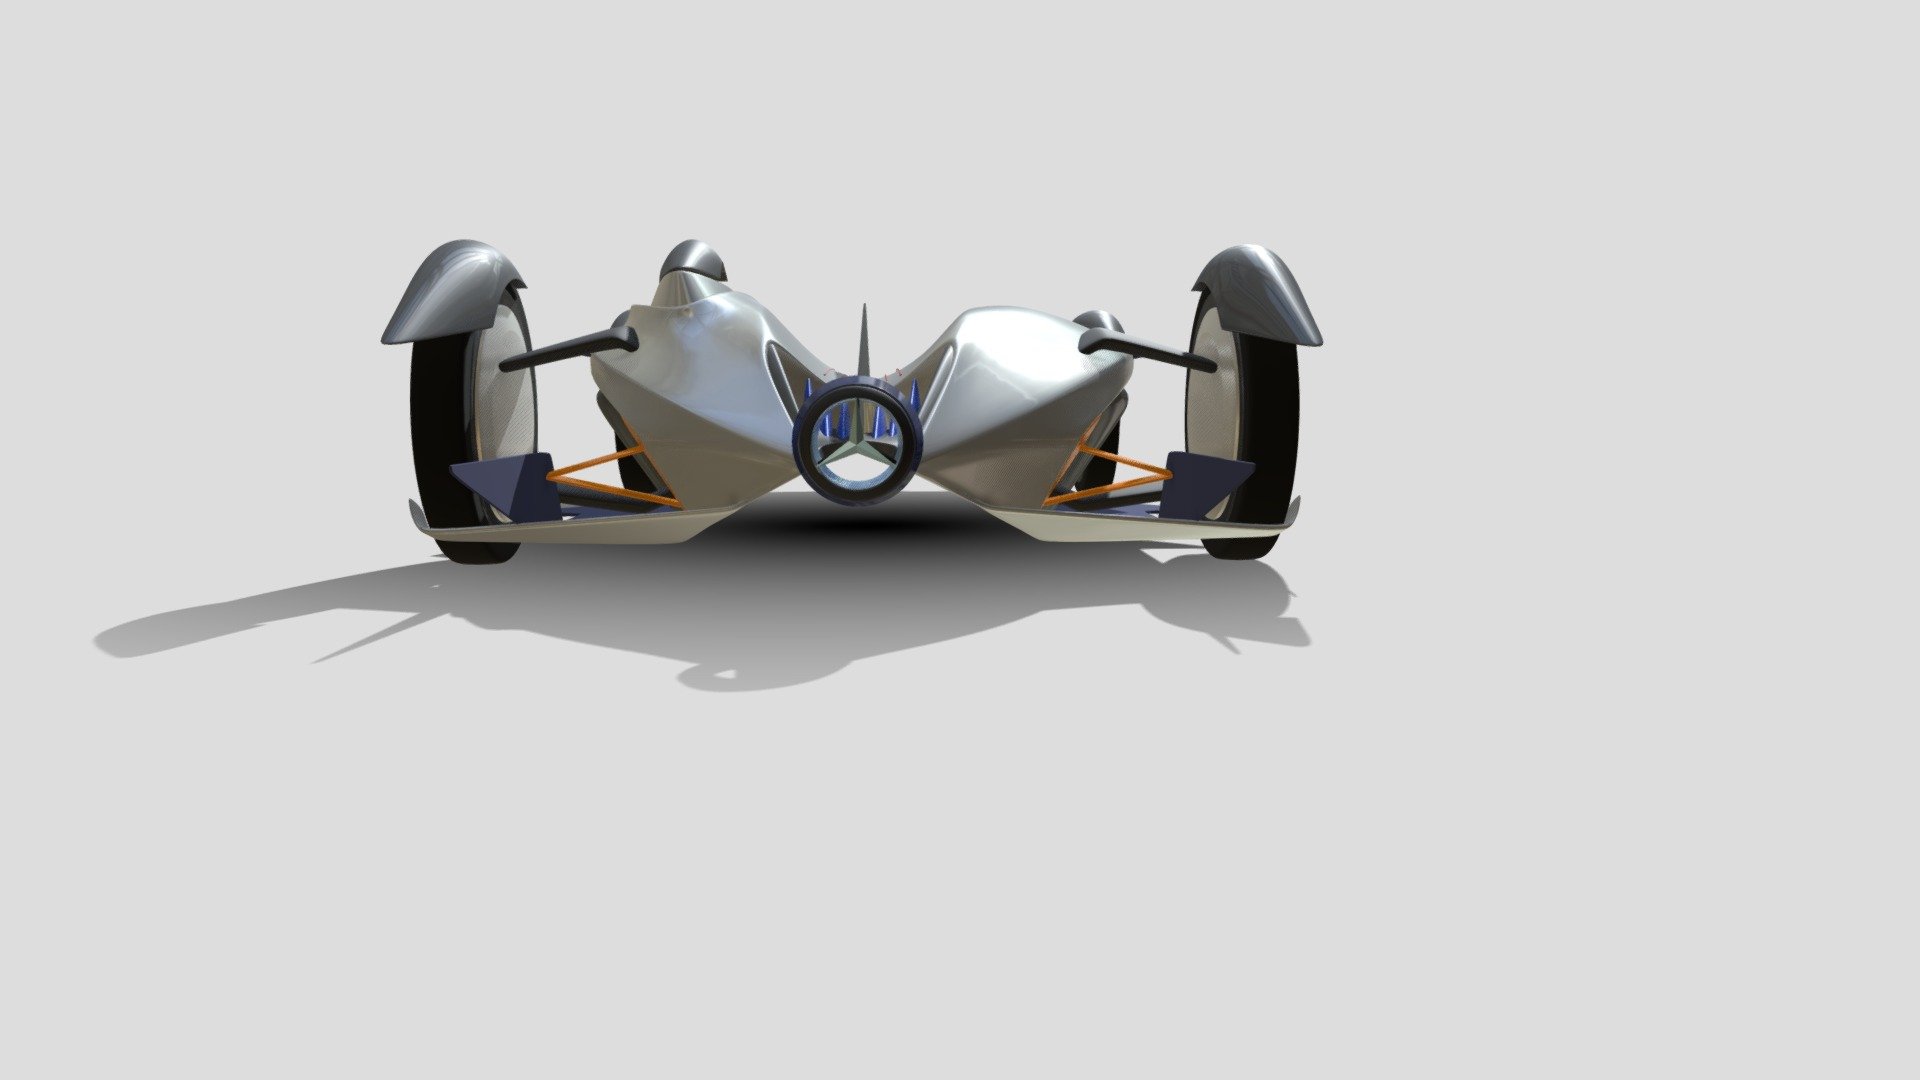 Ever since working on my other Mercedes Benz concepts, I've been working on this one in the background.  One where the aesthetic of the vehicle is literally derived from the 3 pointed star of the MB emblem.  What you see here is a future formula 1 type race car, where the backbone architecture of the vehicle grows from the the planes described by the points of the star logo.  Asymmetrical driver position.  This one was alot of fun.  From thought to 3D while completely immersed in VR, created using Gravity Sketch 3d model